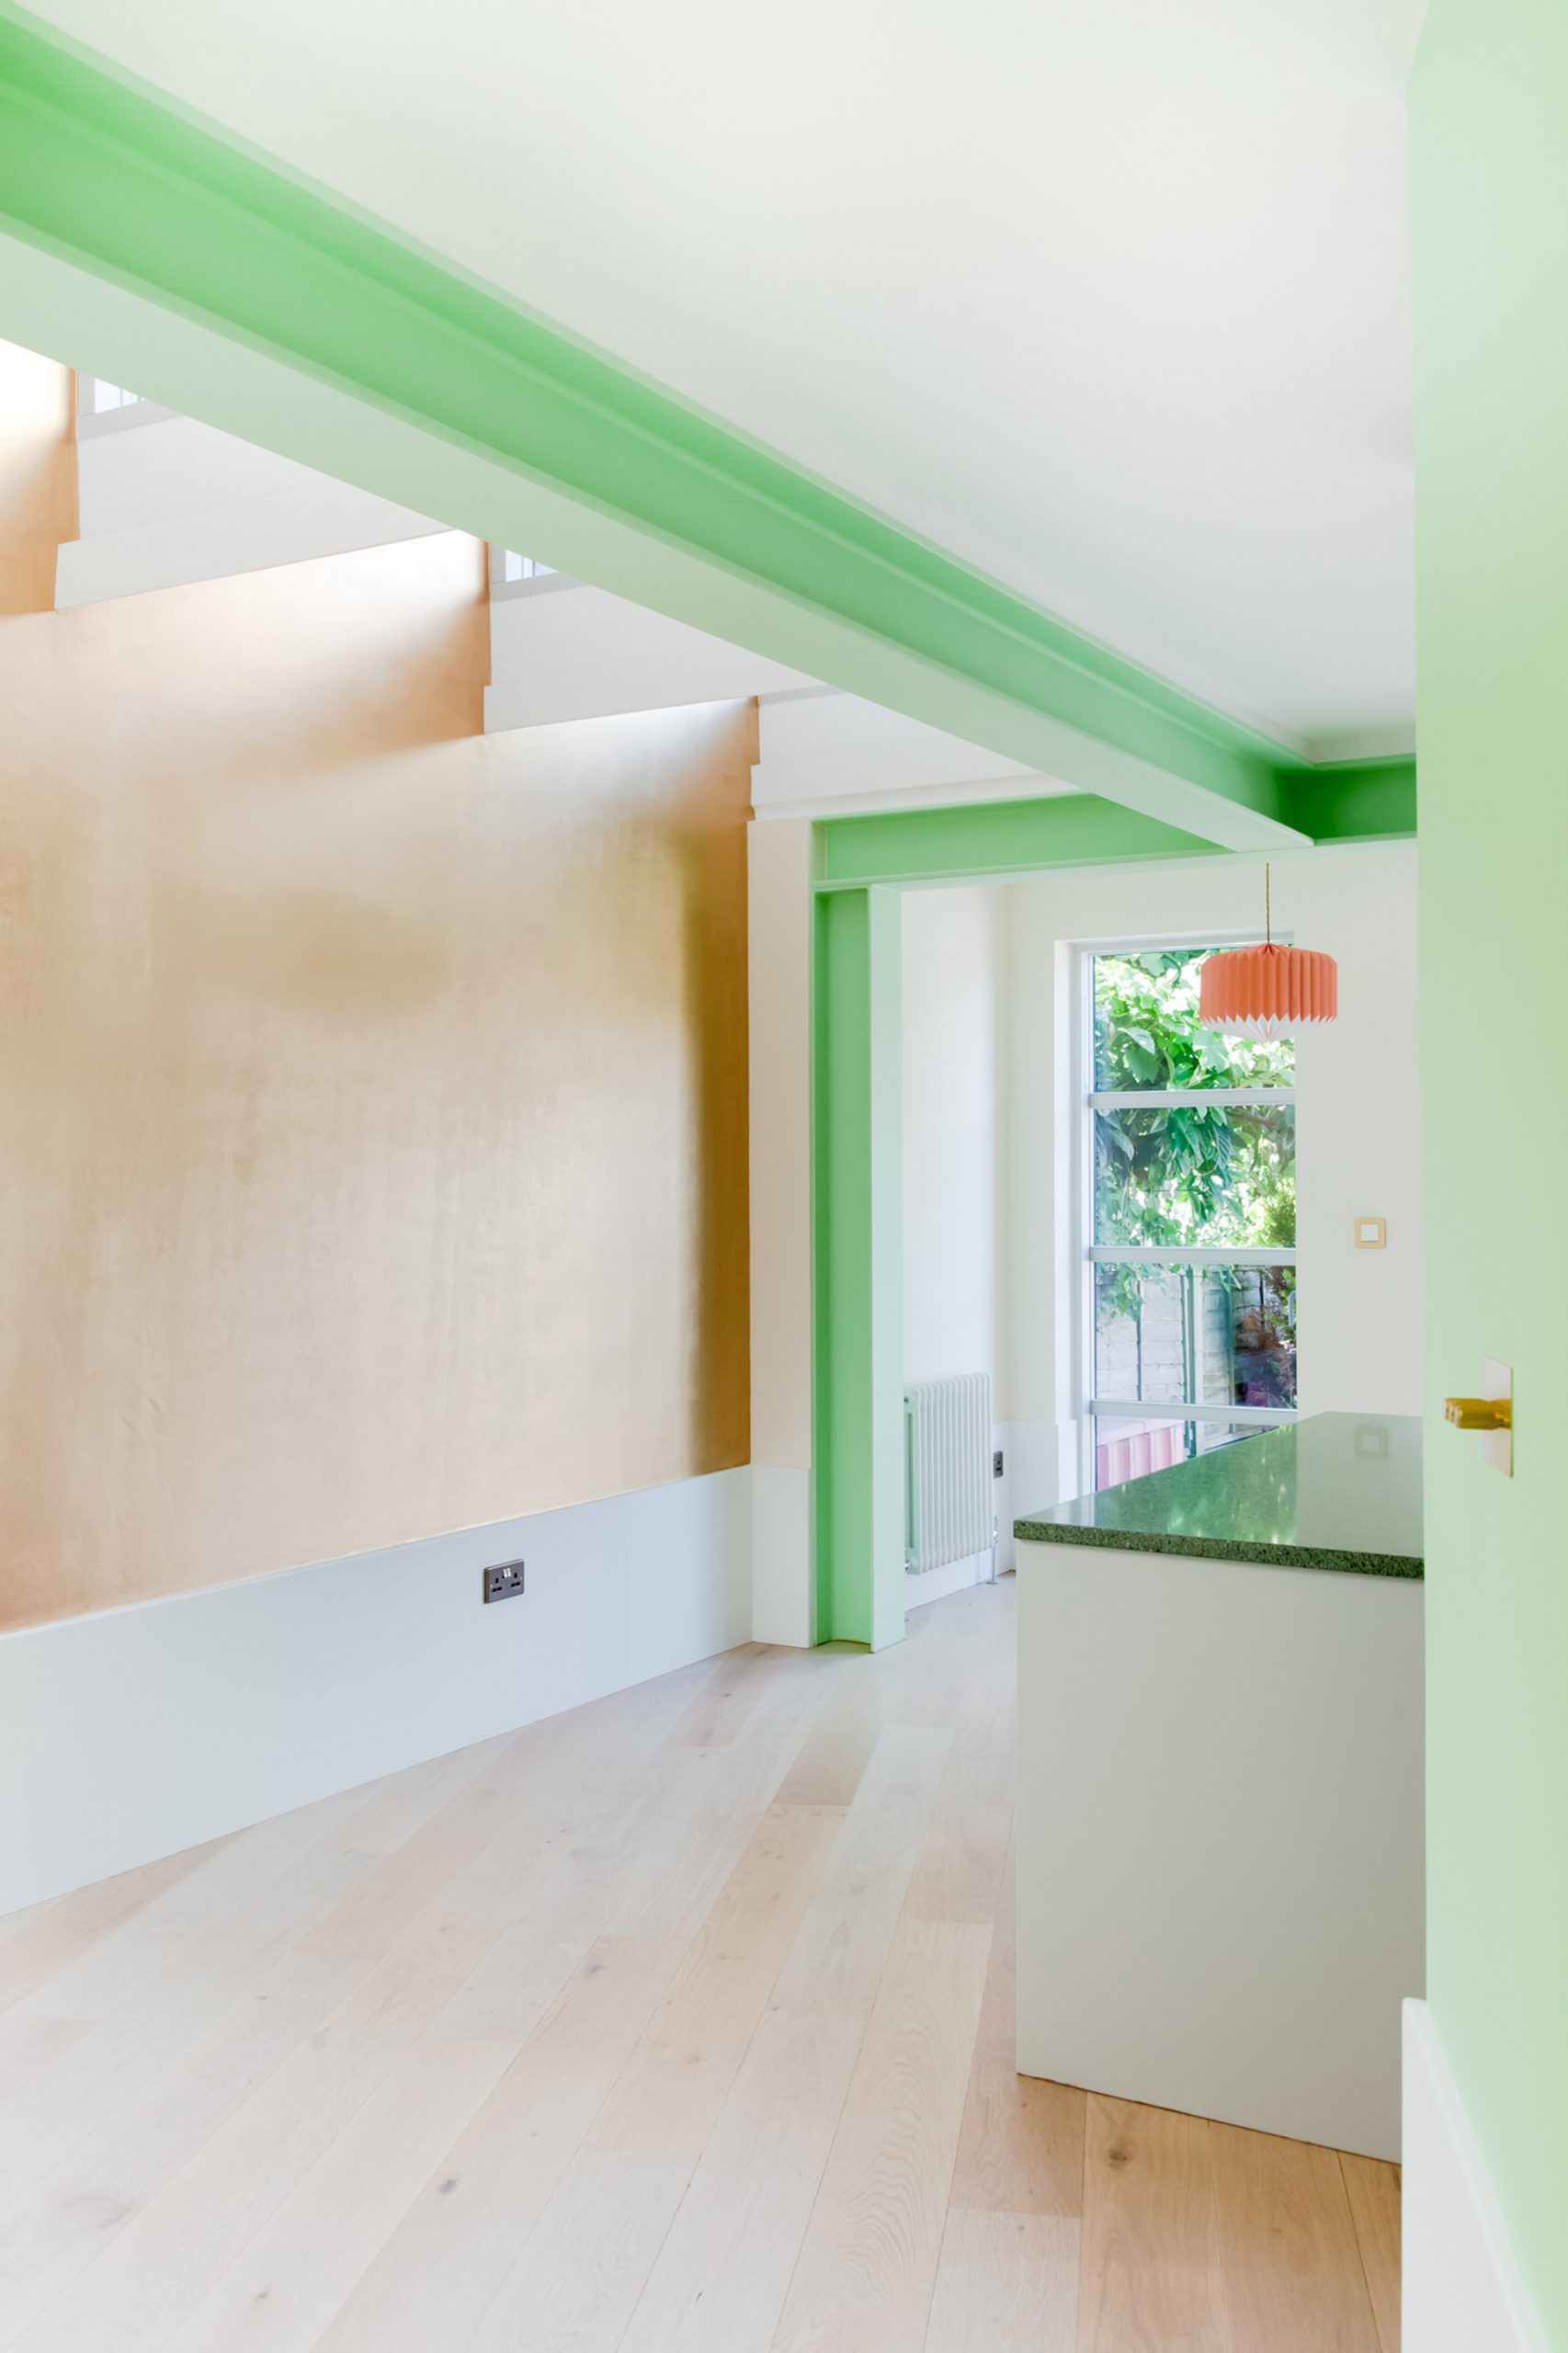 A light kitchen extension with green structural beams